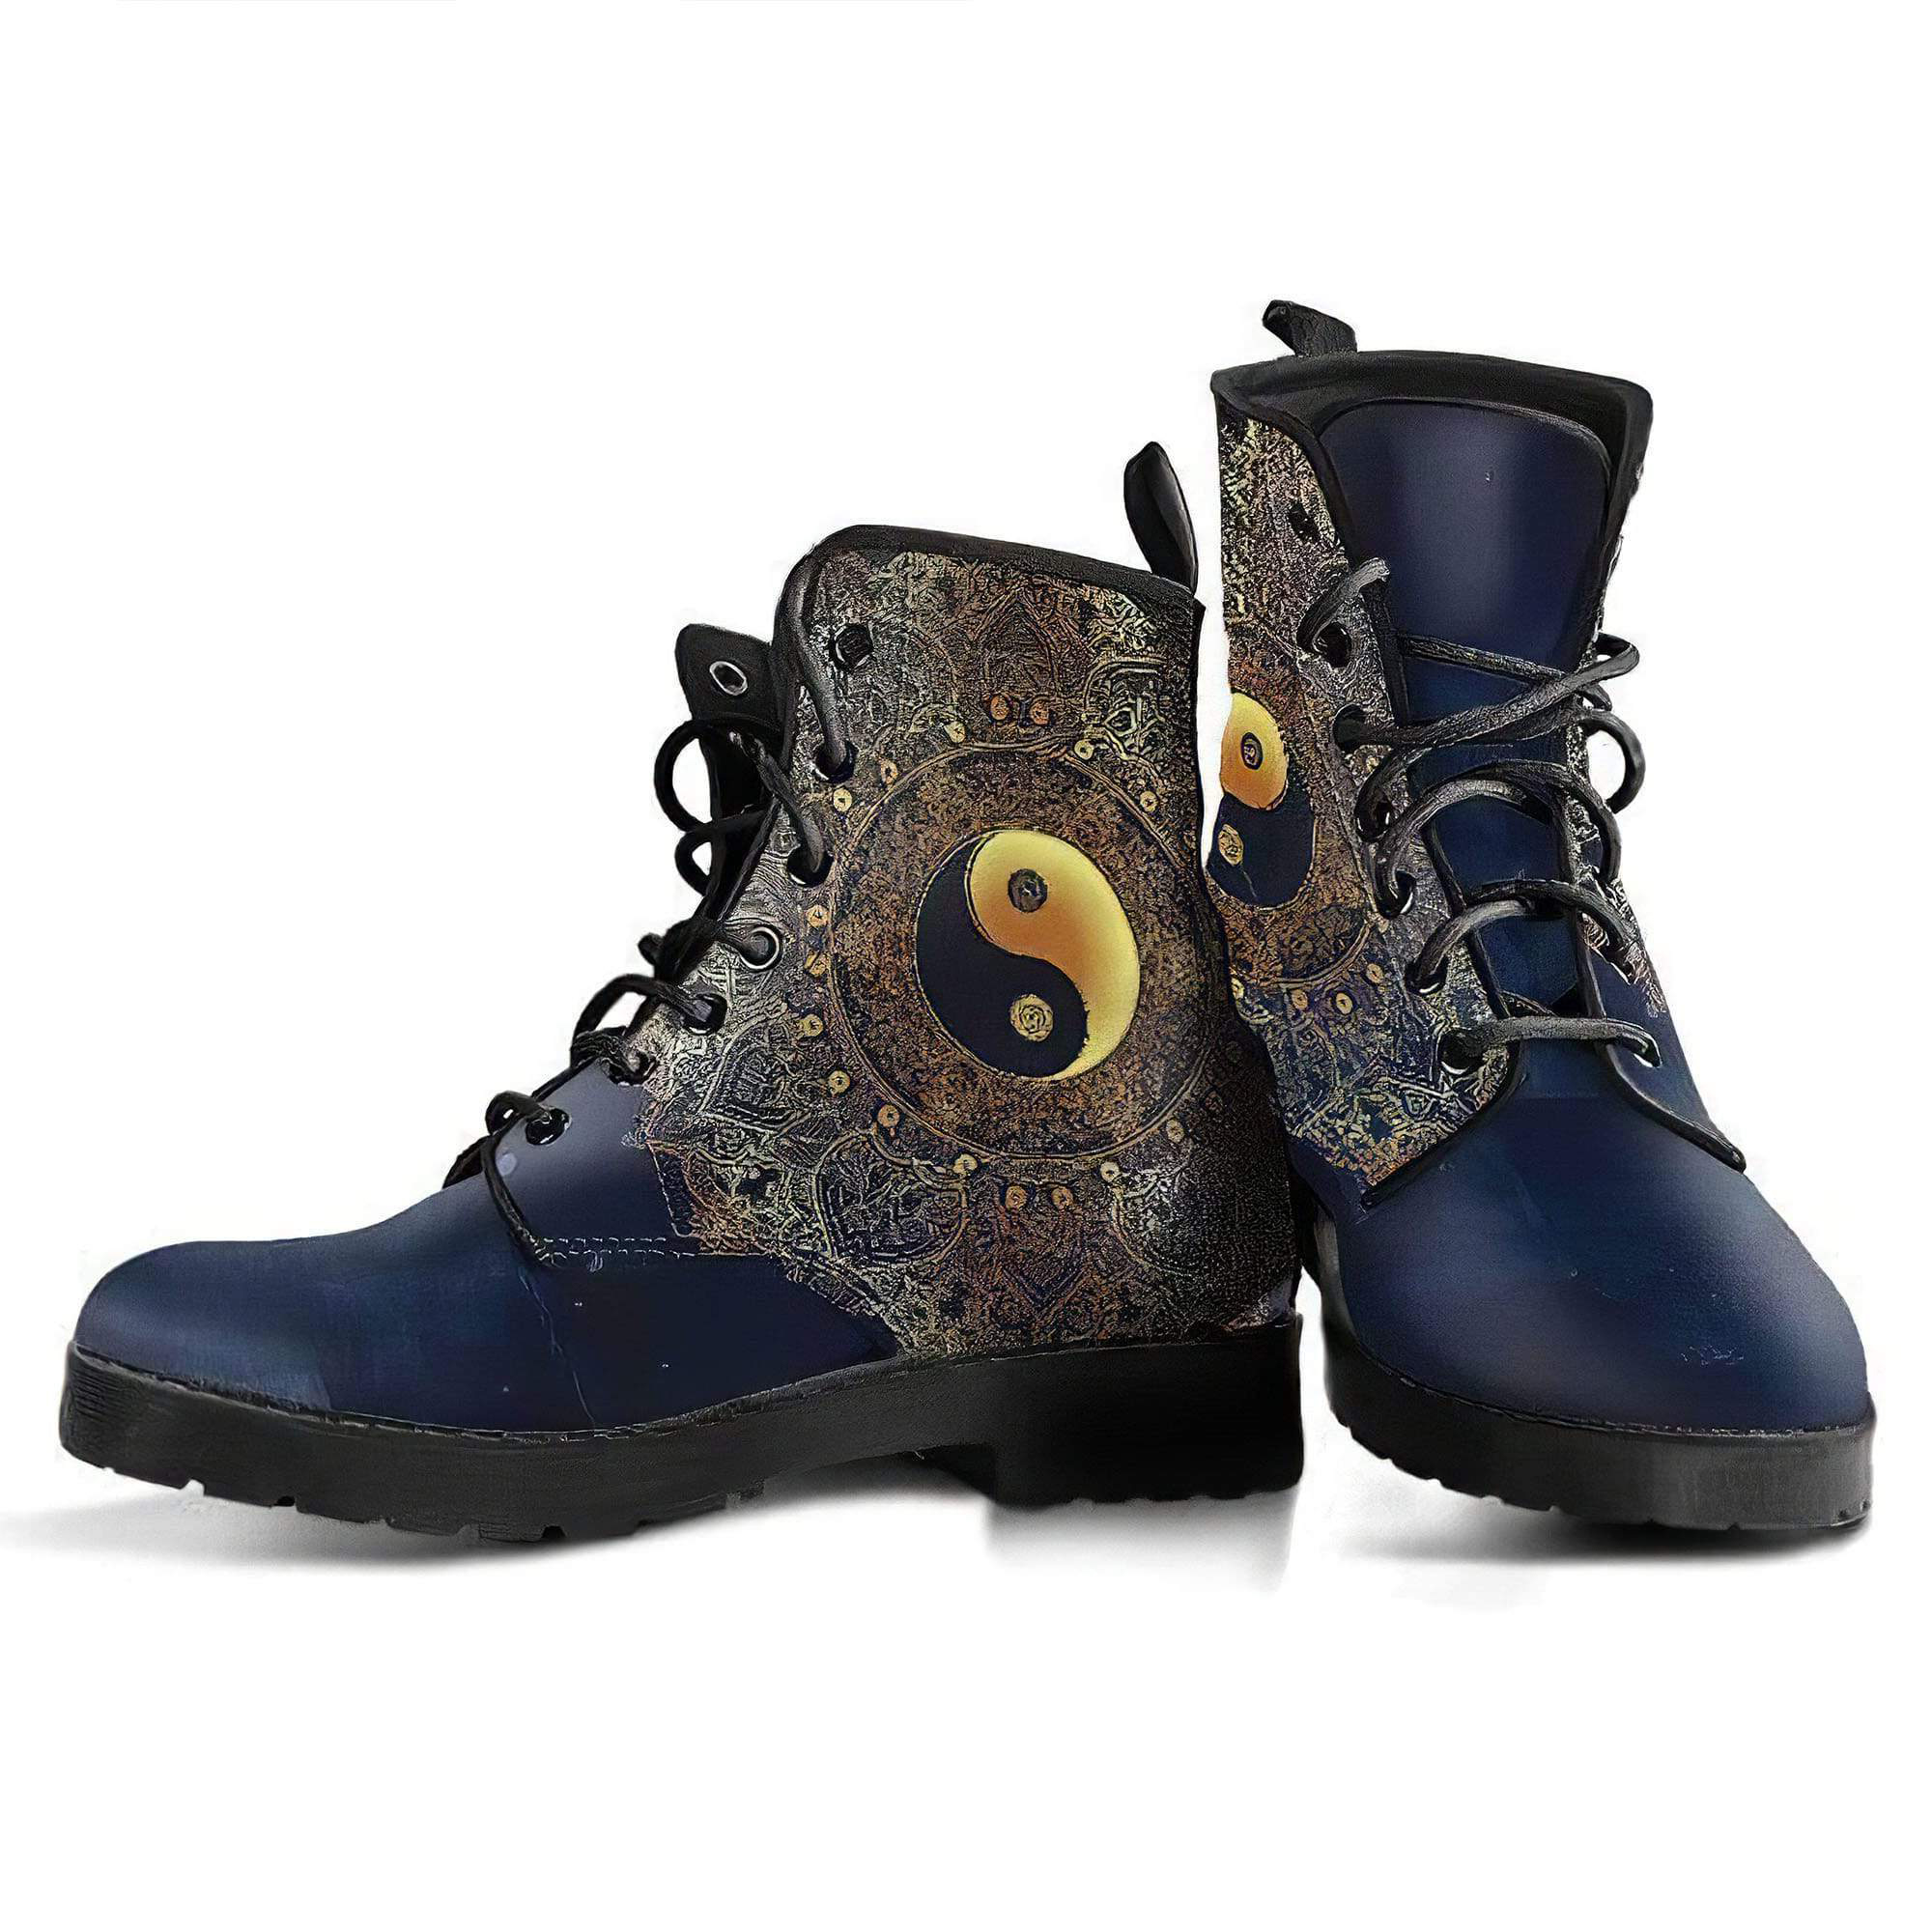 yinyang-mandala-4-handcrafted-boots-women-s-leather-boots-12051983007805.jpg